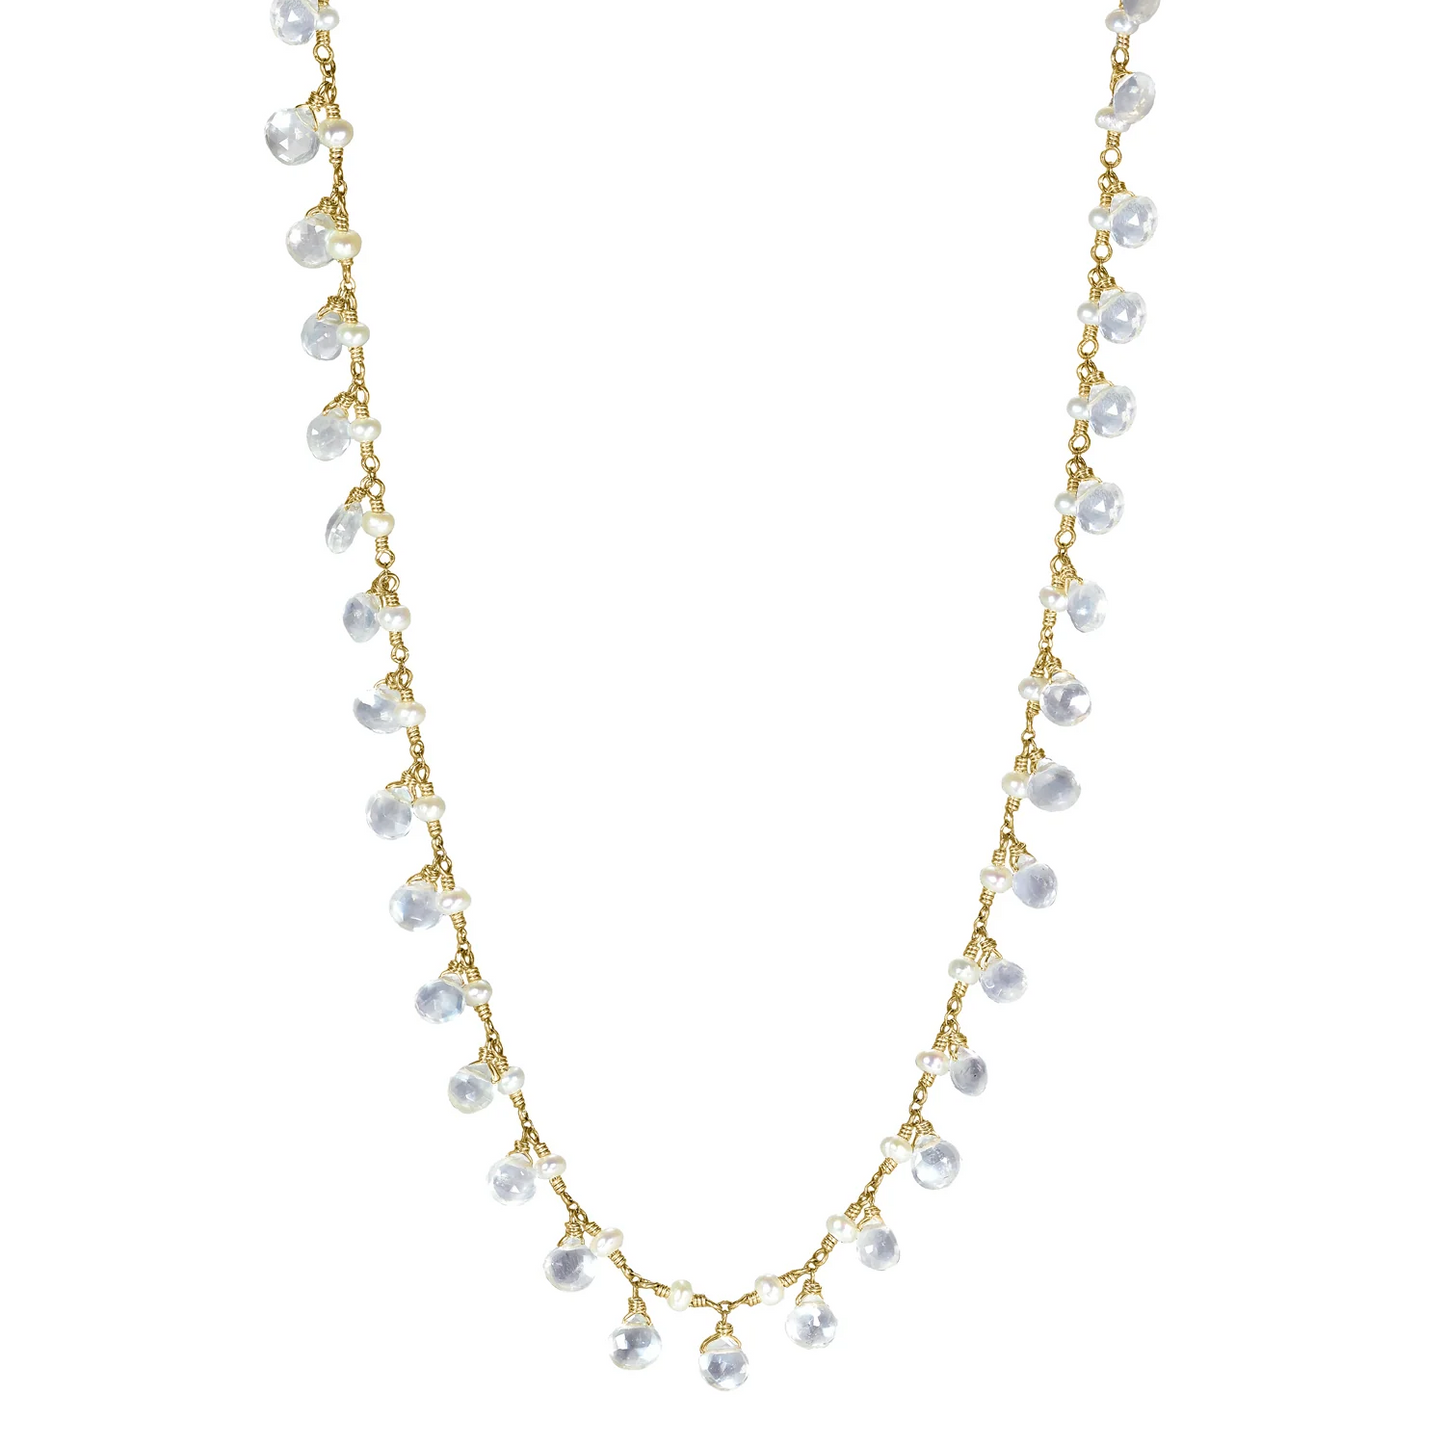 Moonstone & Pearl Necklace